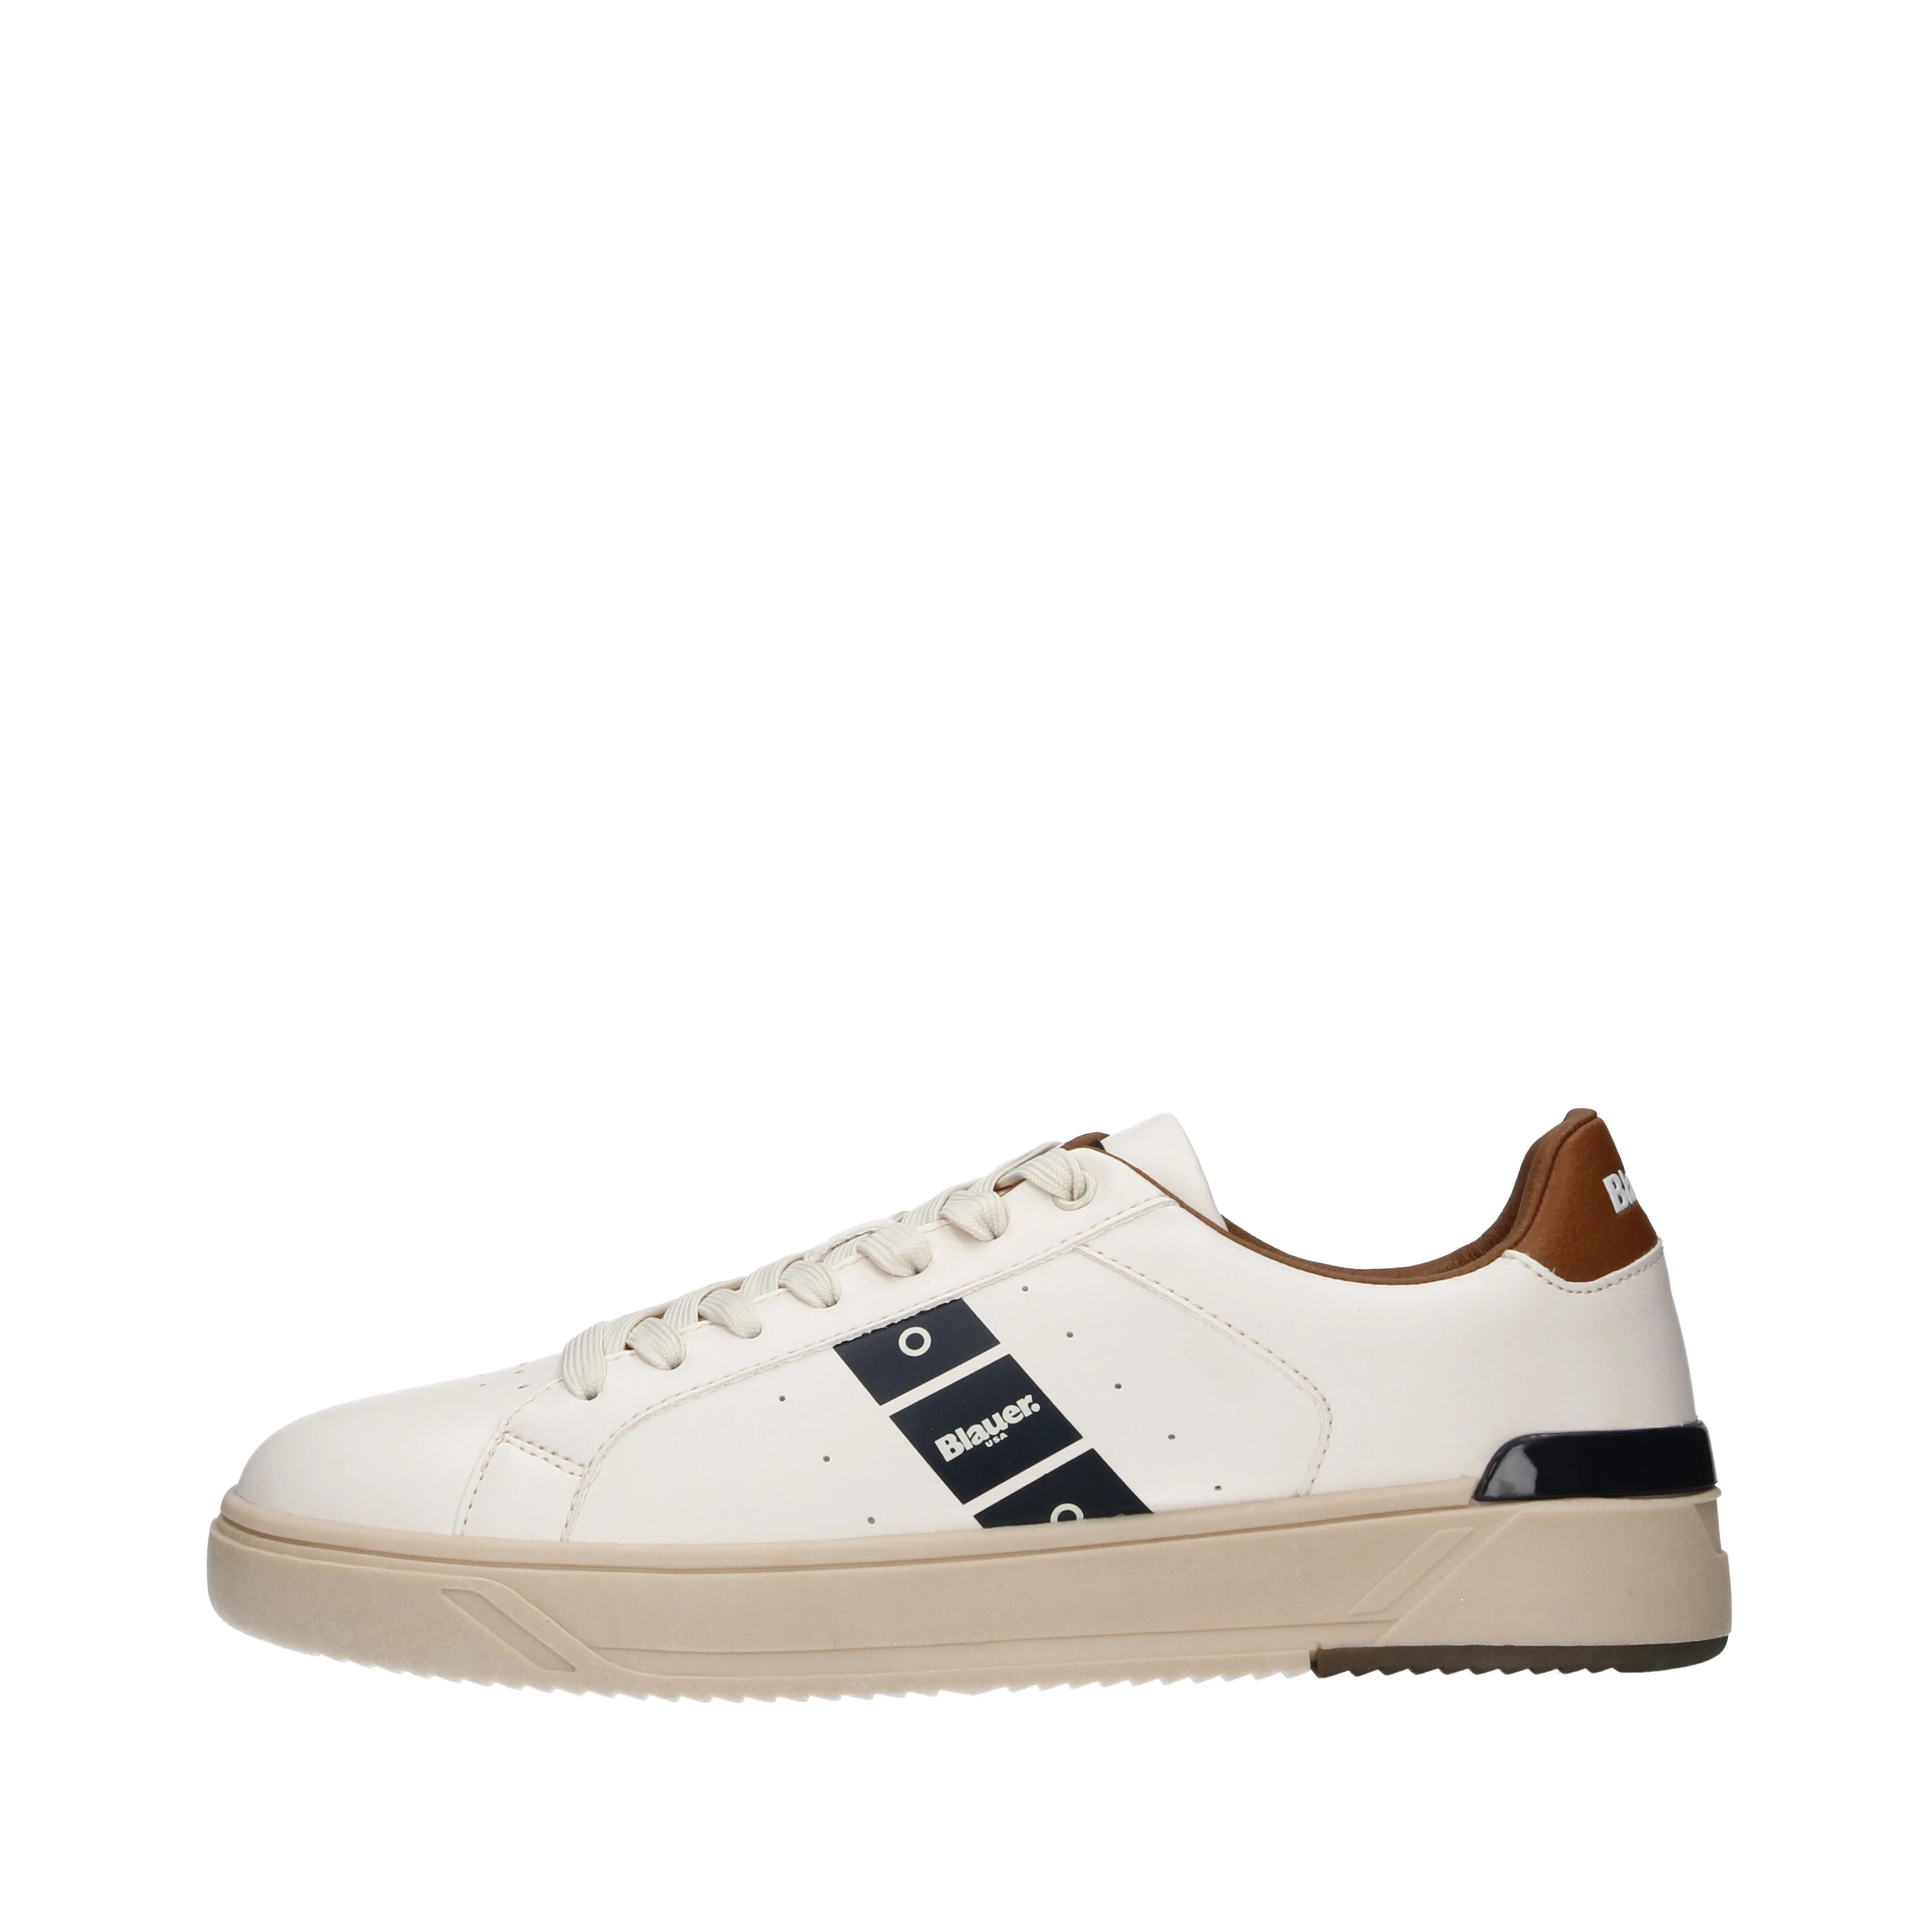 SNEAKERS ANSON01 IN ECOPELLE UOMO BIANCO